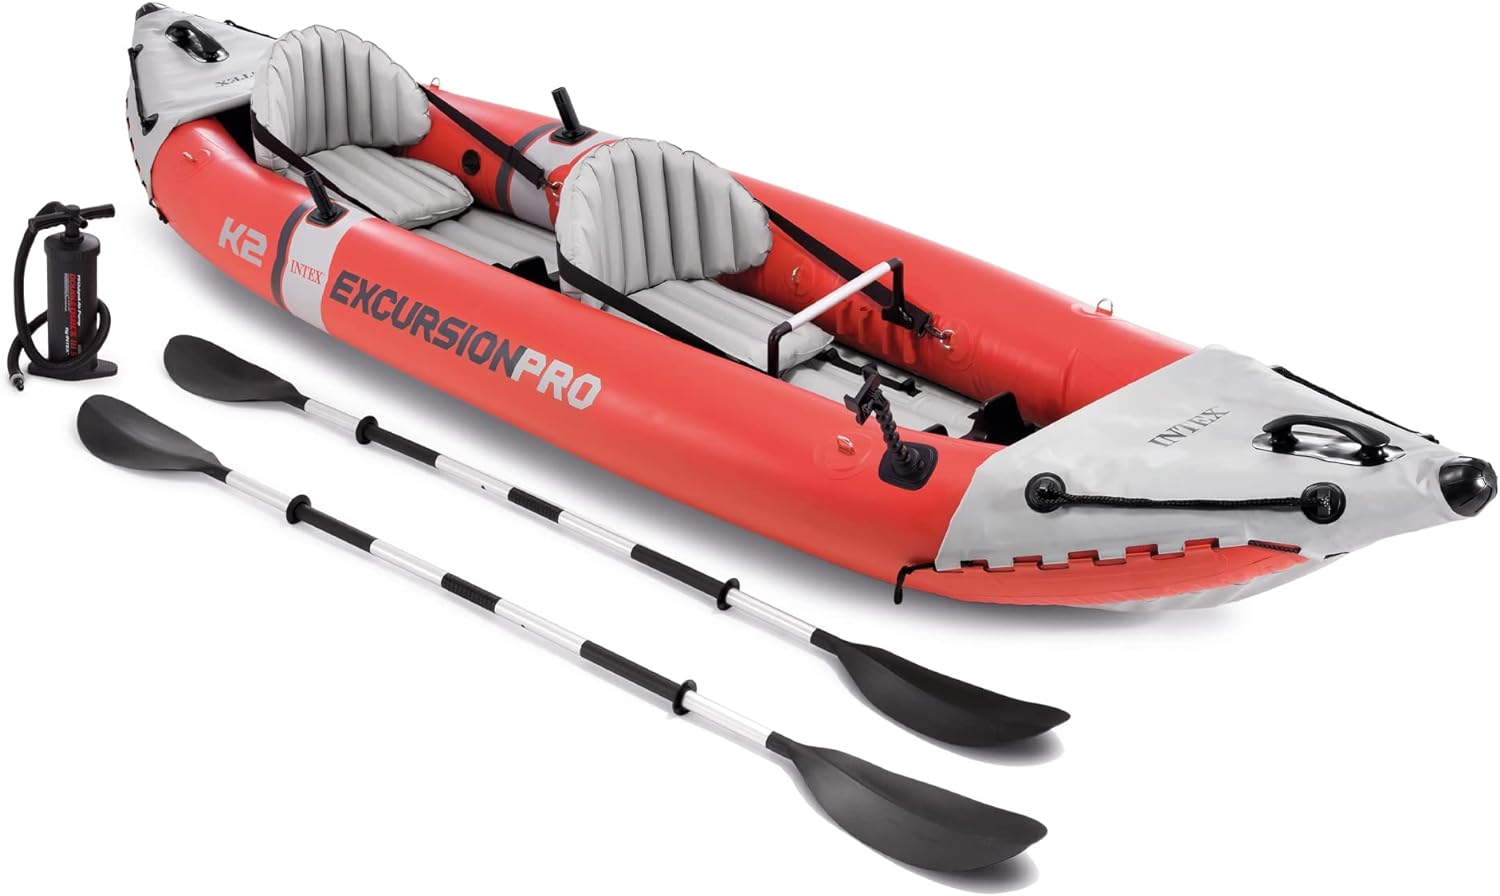 INTEX Excursion Pro Inflatable Kayak Review